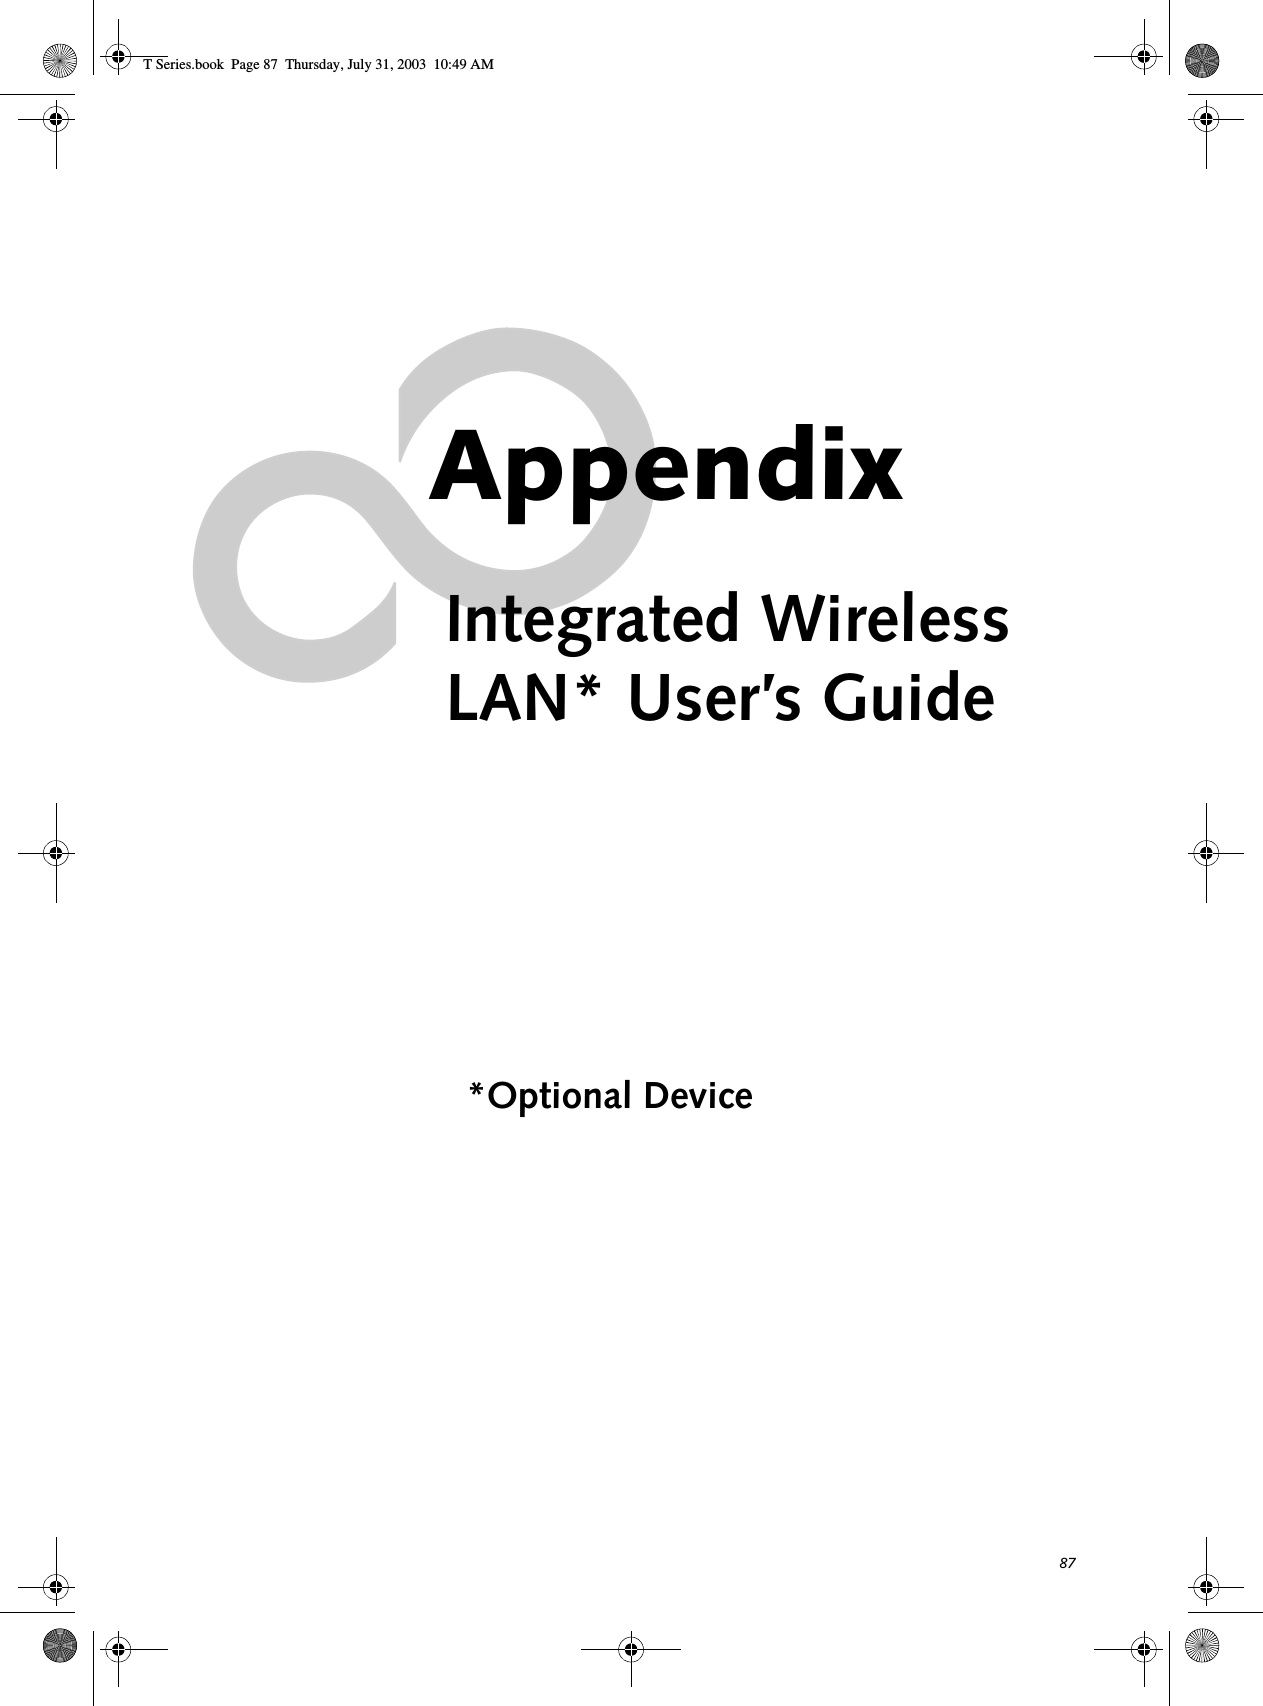 87AppendixIntegrated WirelessLAN* User’s Guide*Optional DeviceT Series.book  Page 87  Thursday, July 31, 2003  10:49 AM